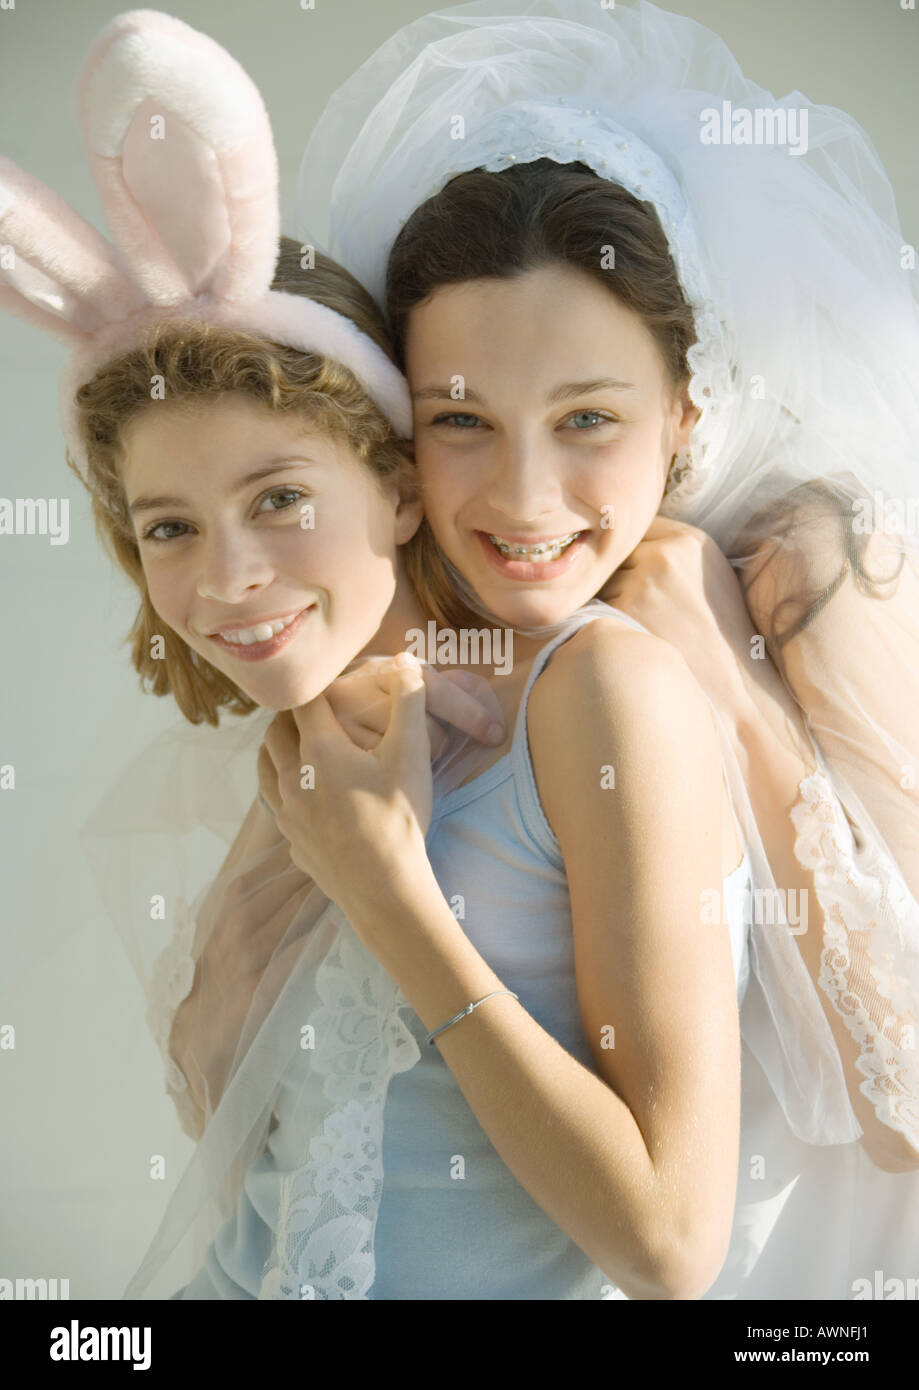 Preteen girls dressed up in costumes Stock Photo